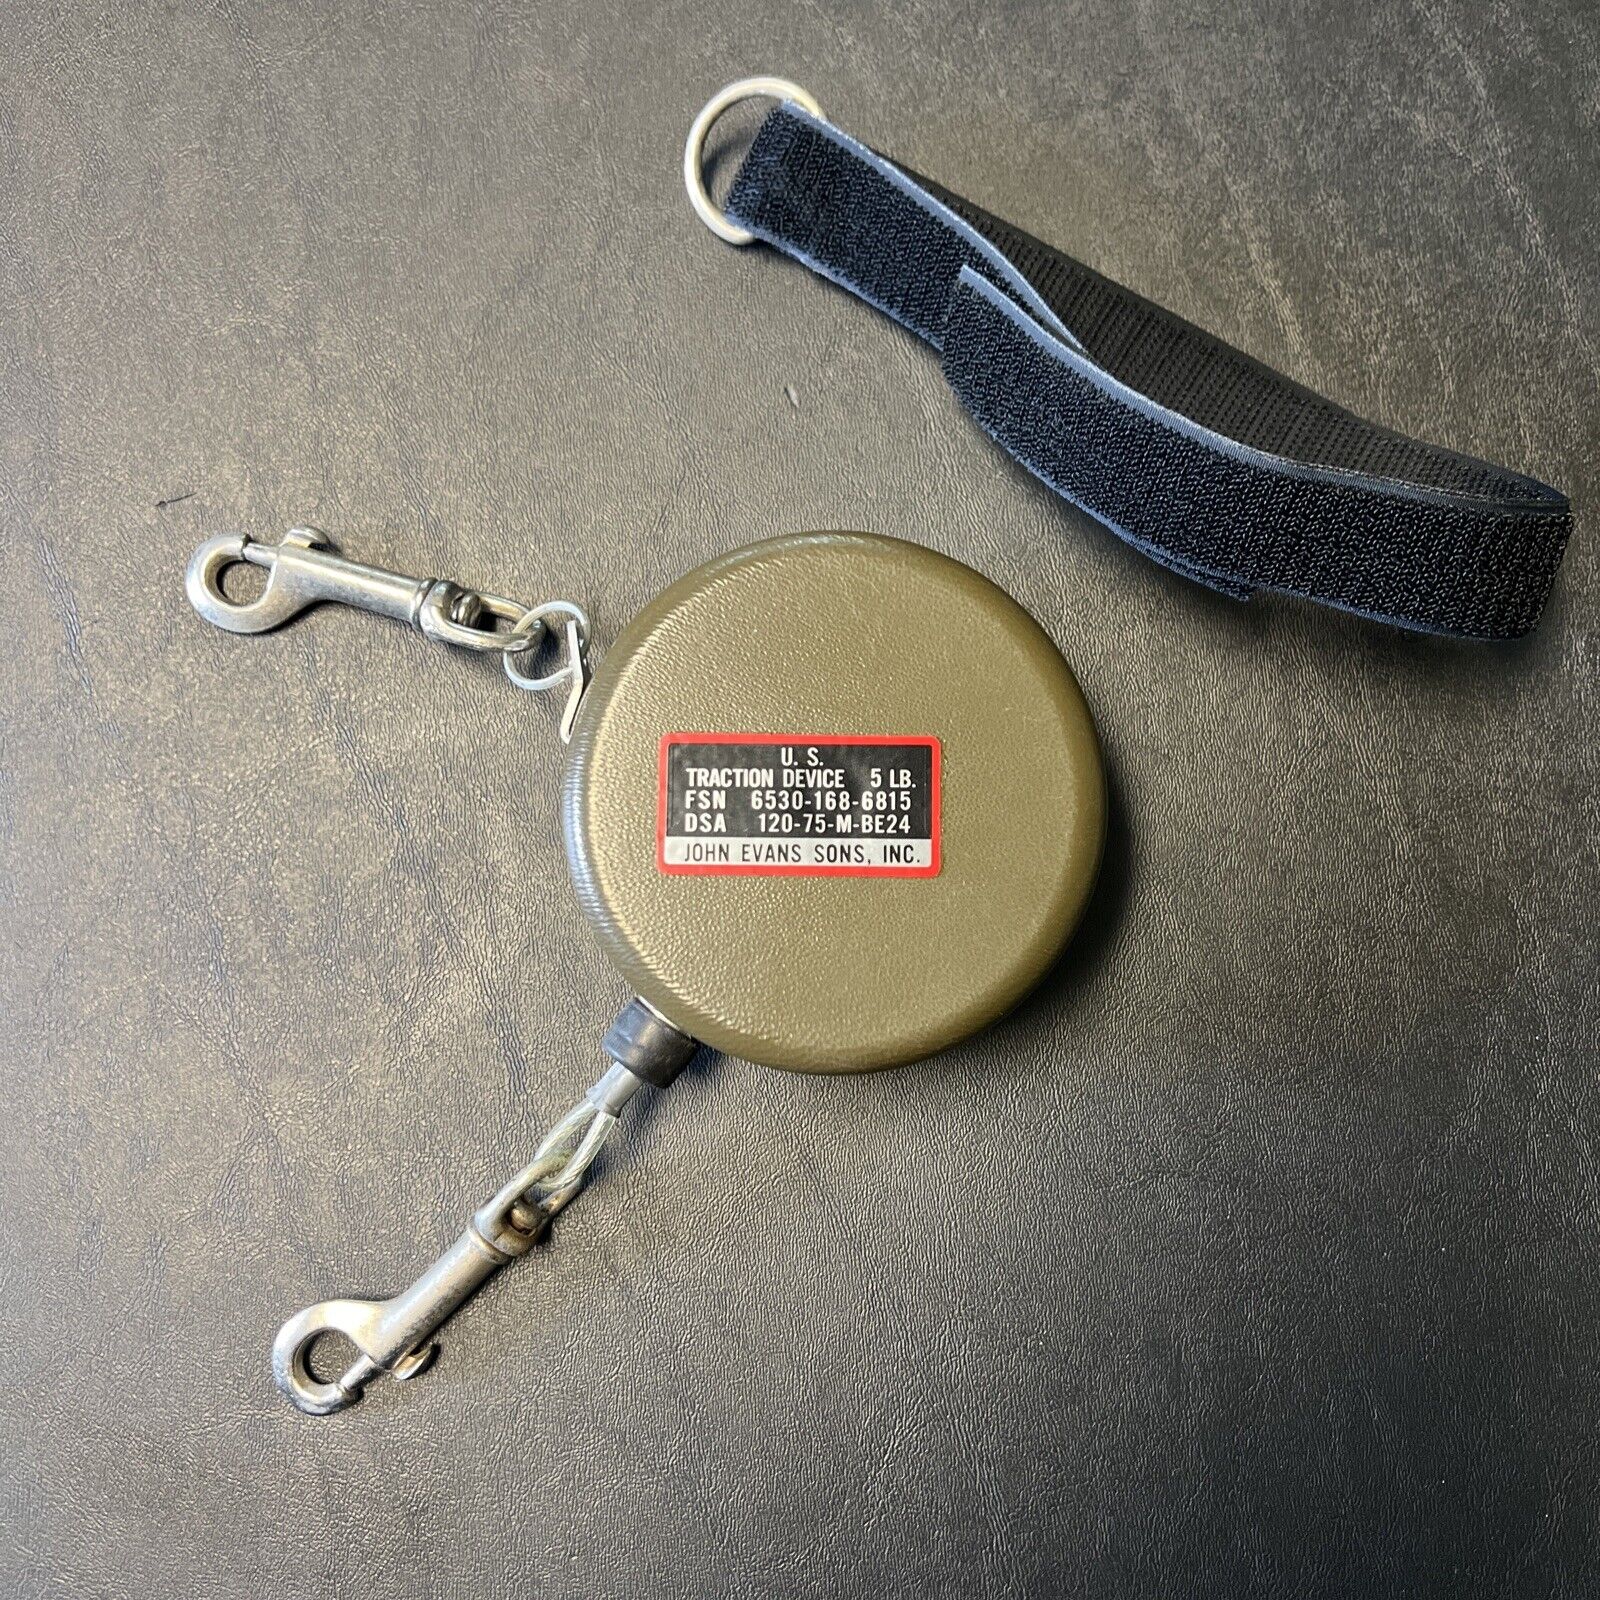 U.S. G.I. TRACTION / TENSION DEVICE 5 lb. TYPE II   K-62